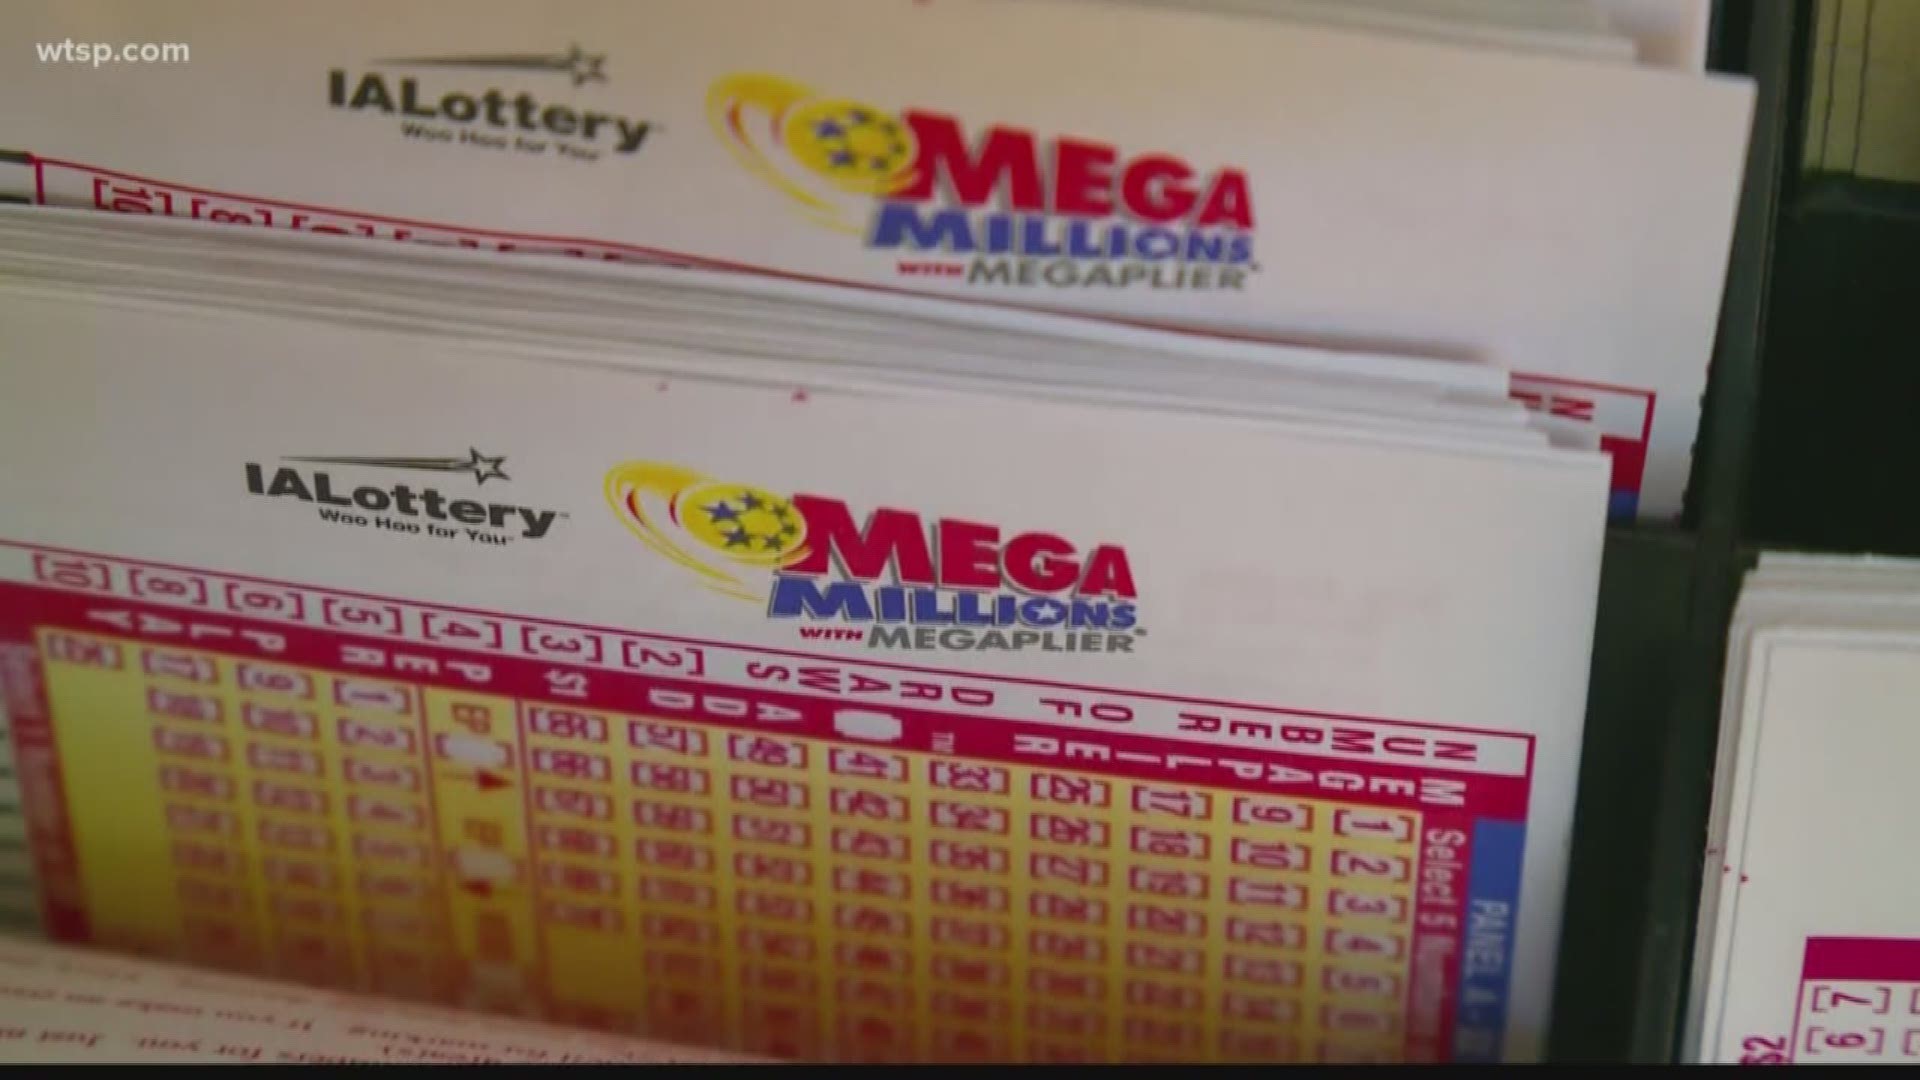 Friday night’s drawing is worth $530 million with a cash payout of about $343.9 million. It marks the seventh largest-jackpot in the game’s history. https://on.wtsp.com/2I17Hn1